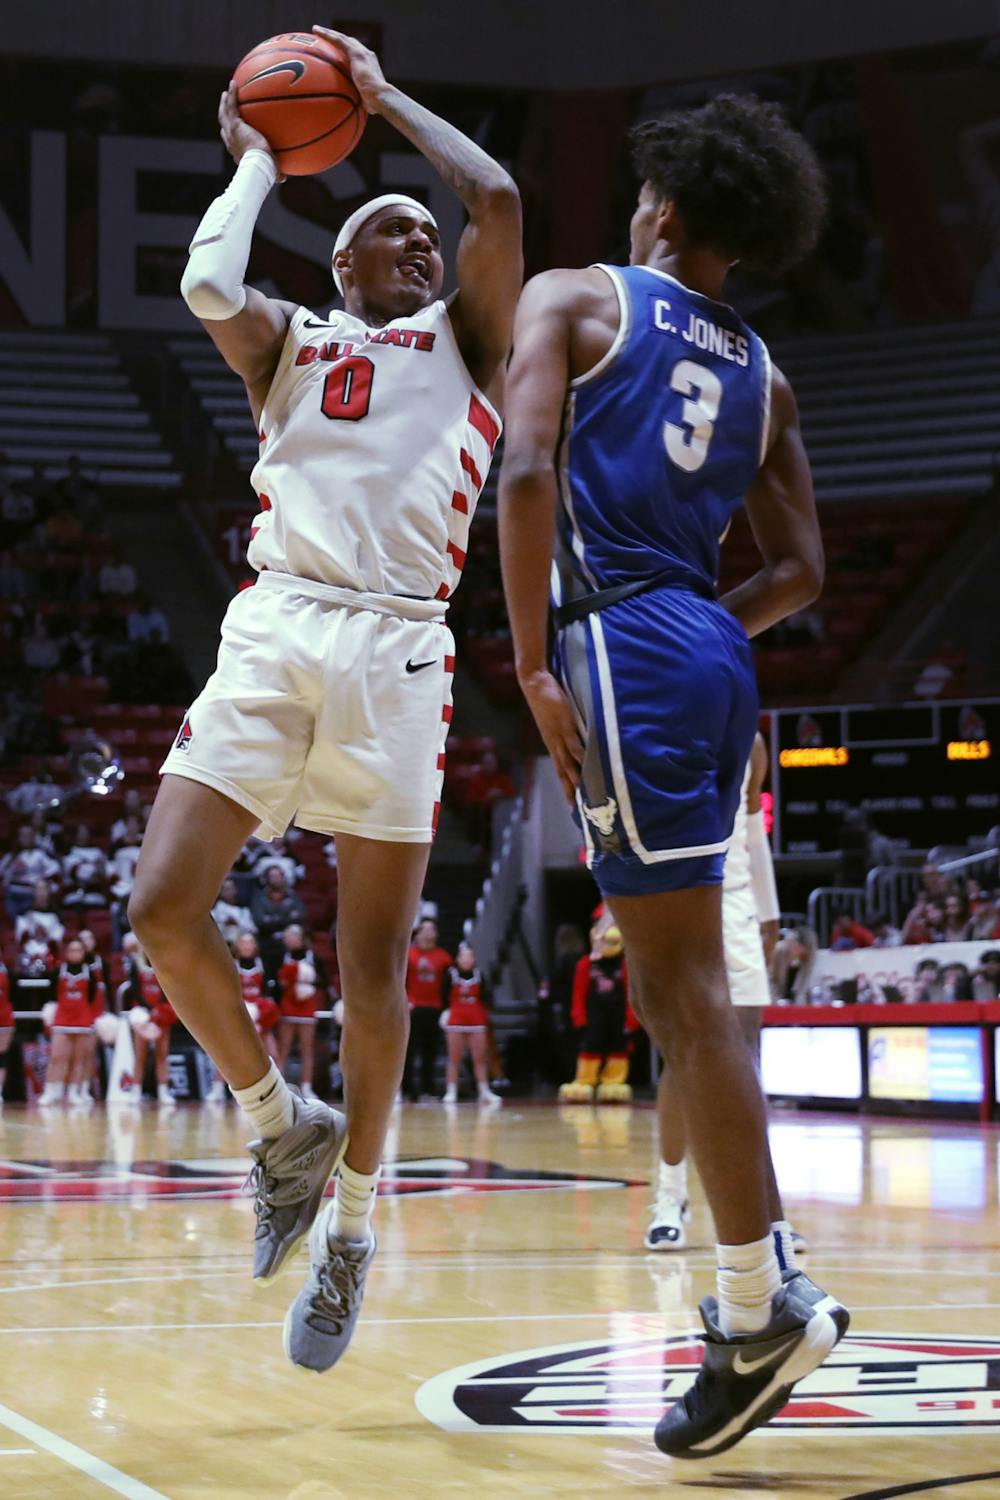 Redshirt junior guard Jarron Coleman goes for a basket in a game against Buffalo Jan. 24 at Worthen Arena. Coleman scored 27 points during the game. Amber Pietz, DN